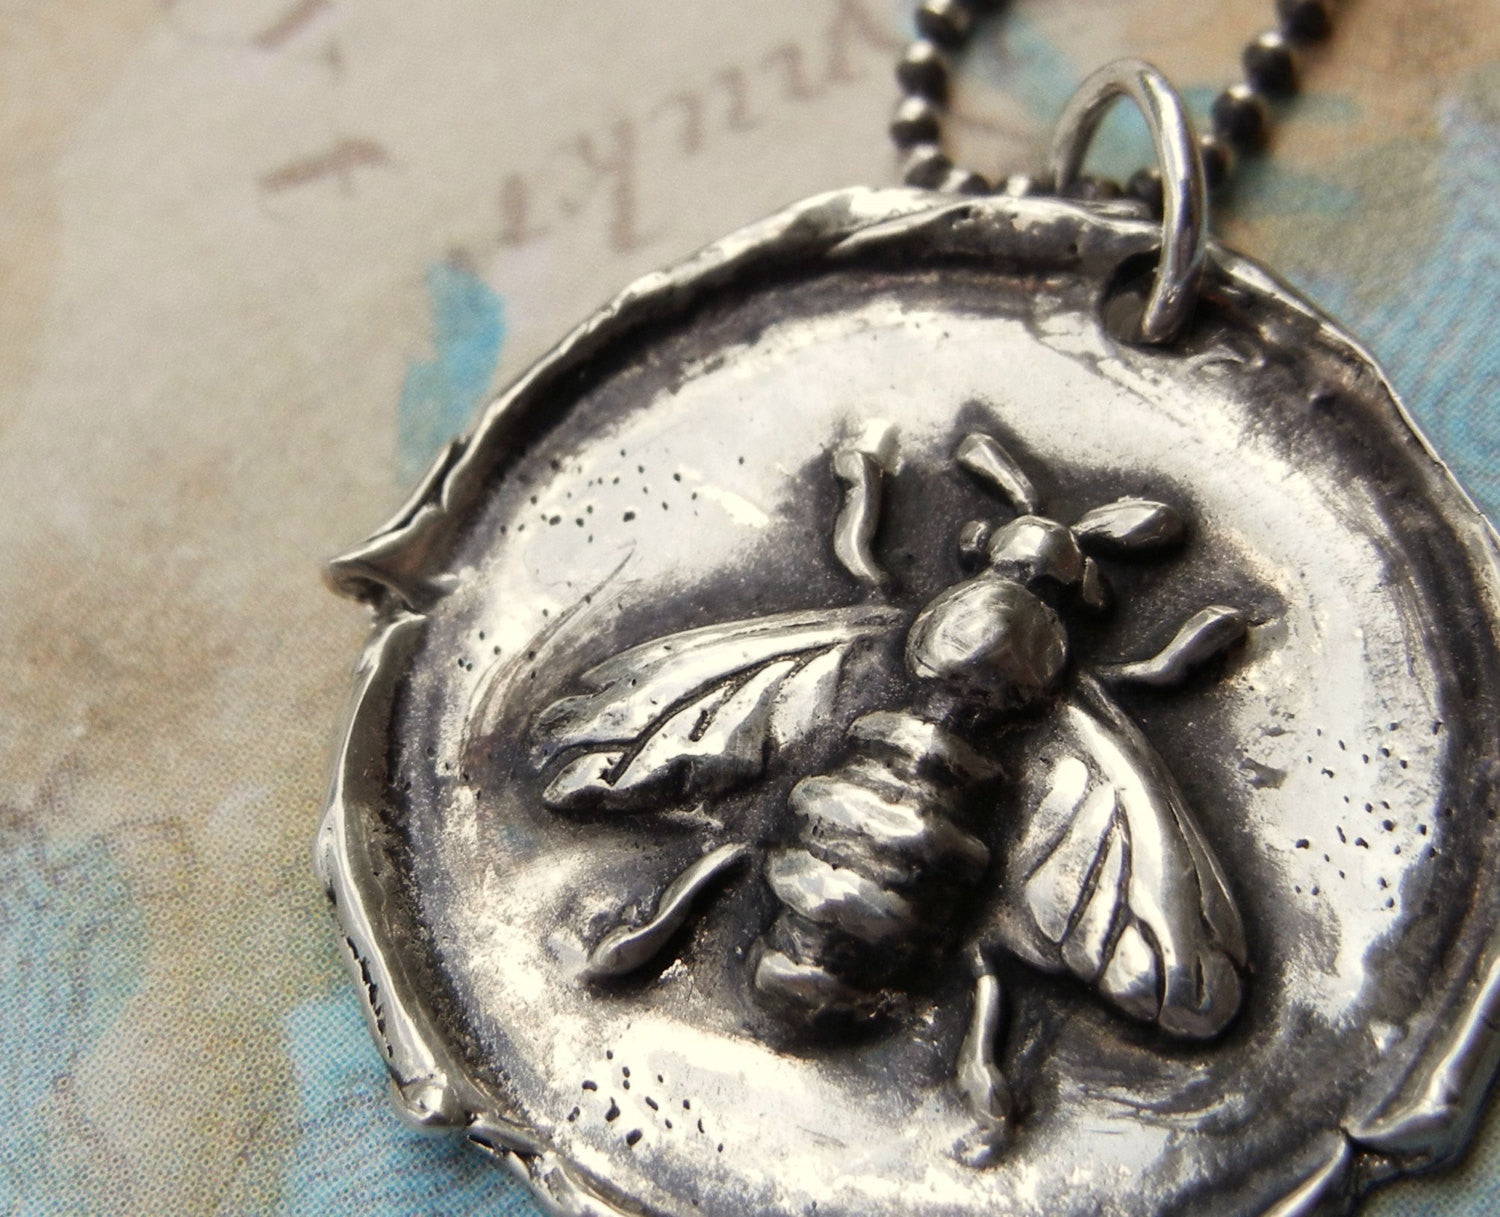 Honey Bee Wax Seal Necklace - HappyGoLicky Jewelry